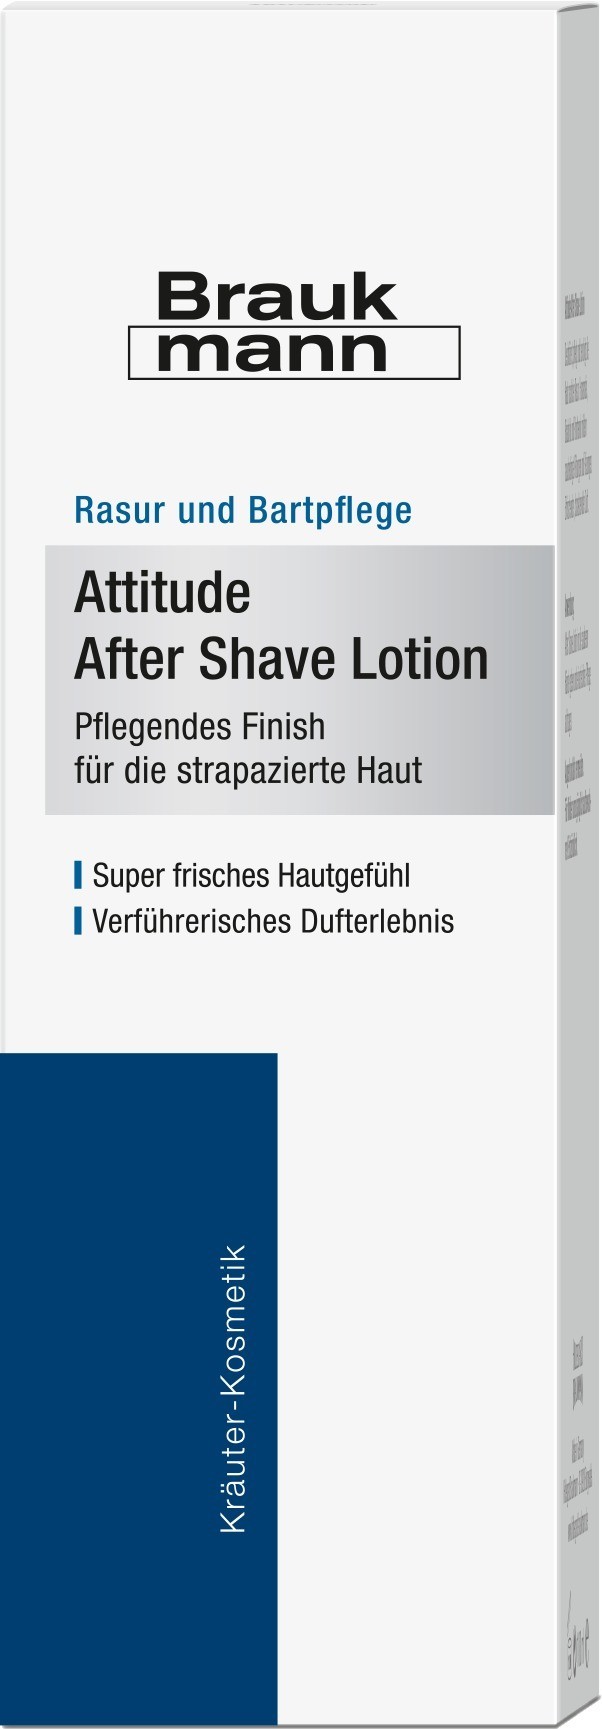 braukmann-attitude-after-shave-lotion